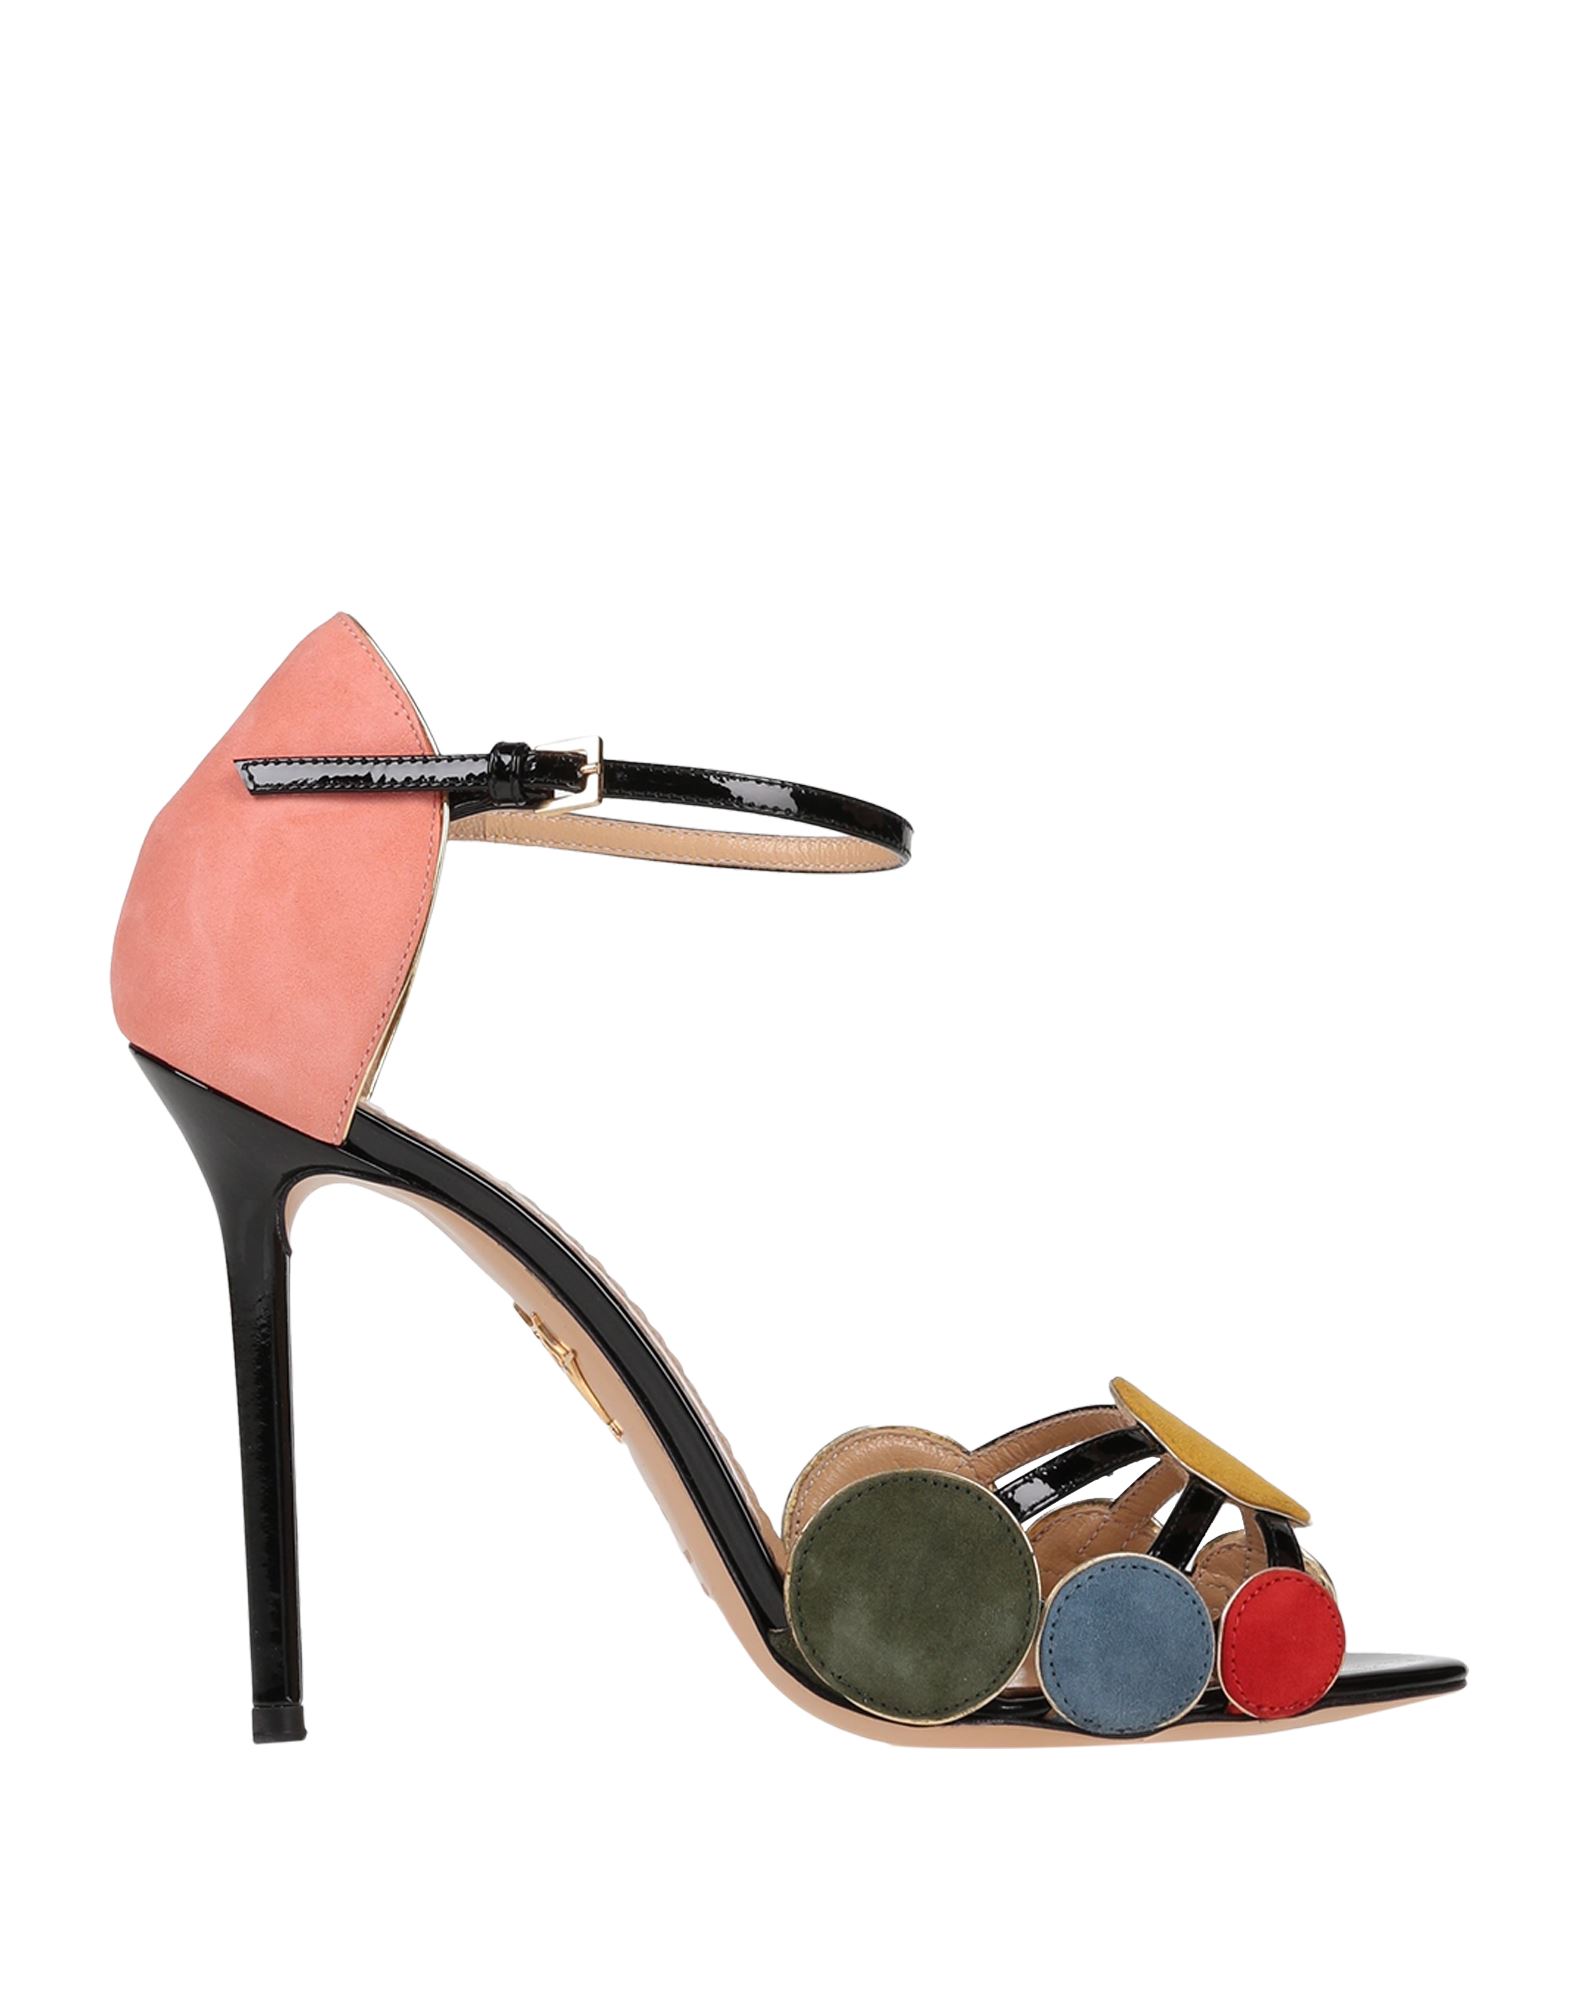 Charlotte Olympia Sandals In Black